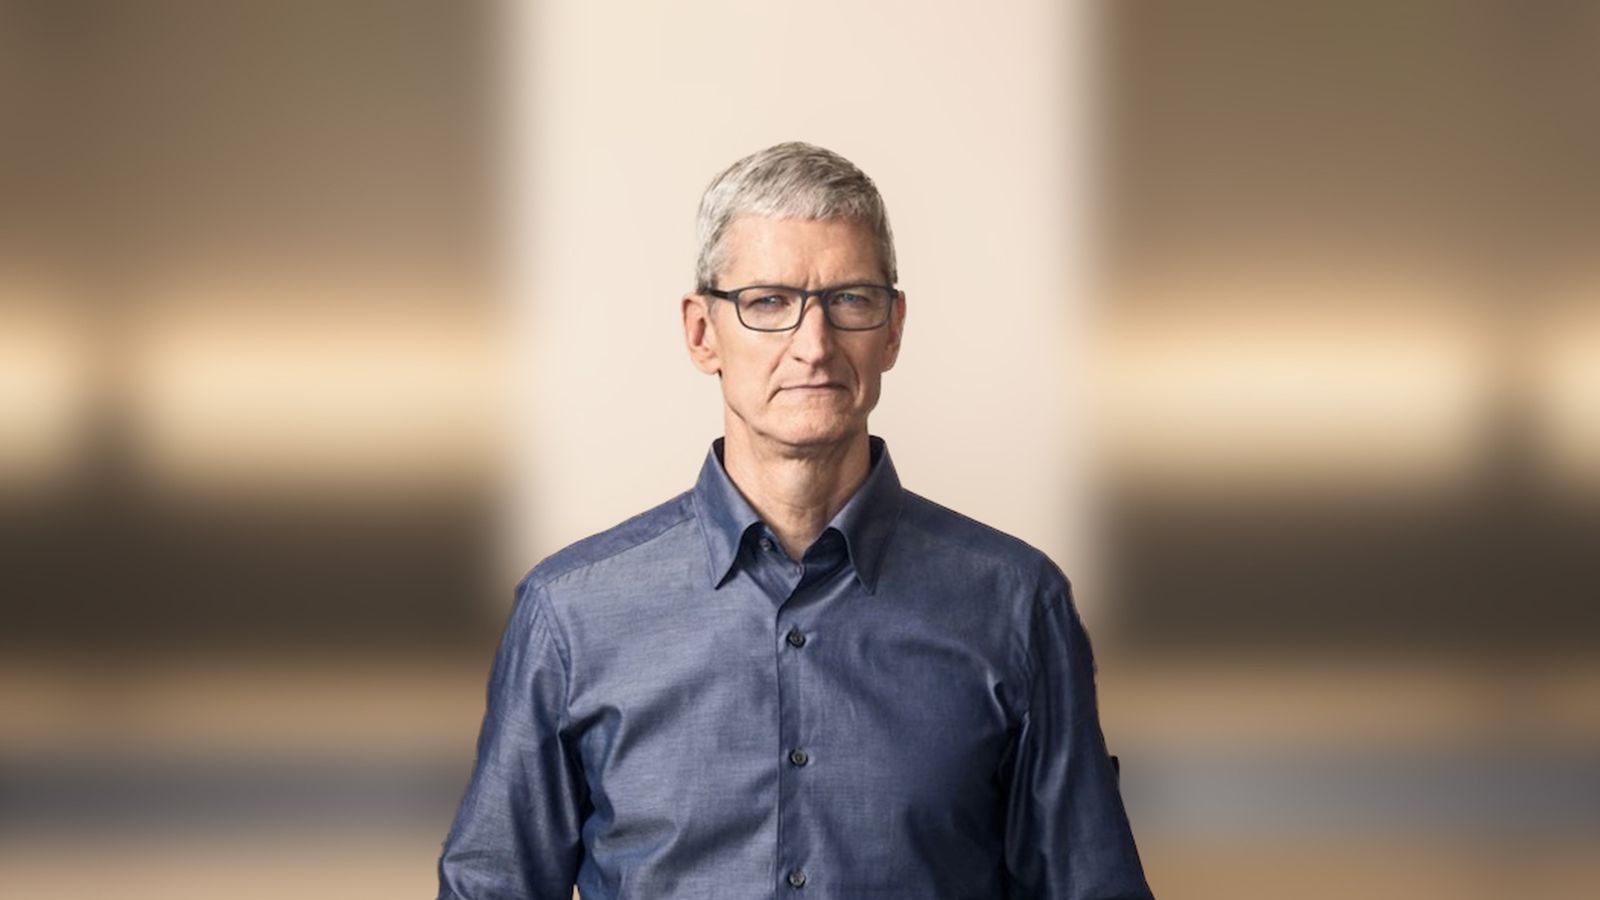 Apple CEO Tim Cook reveals fourth generation Apple TV, coy on watches